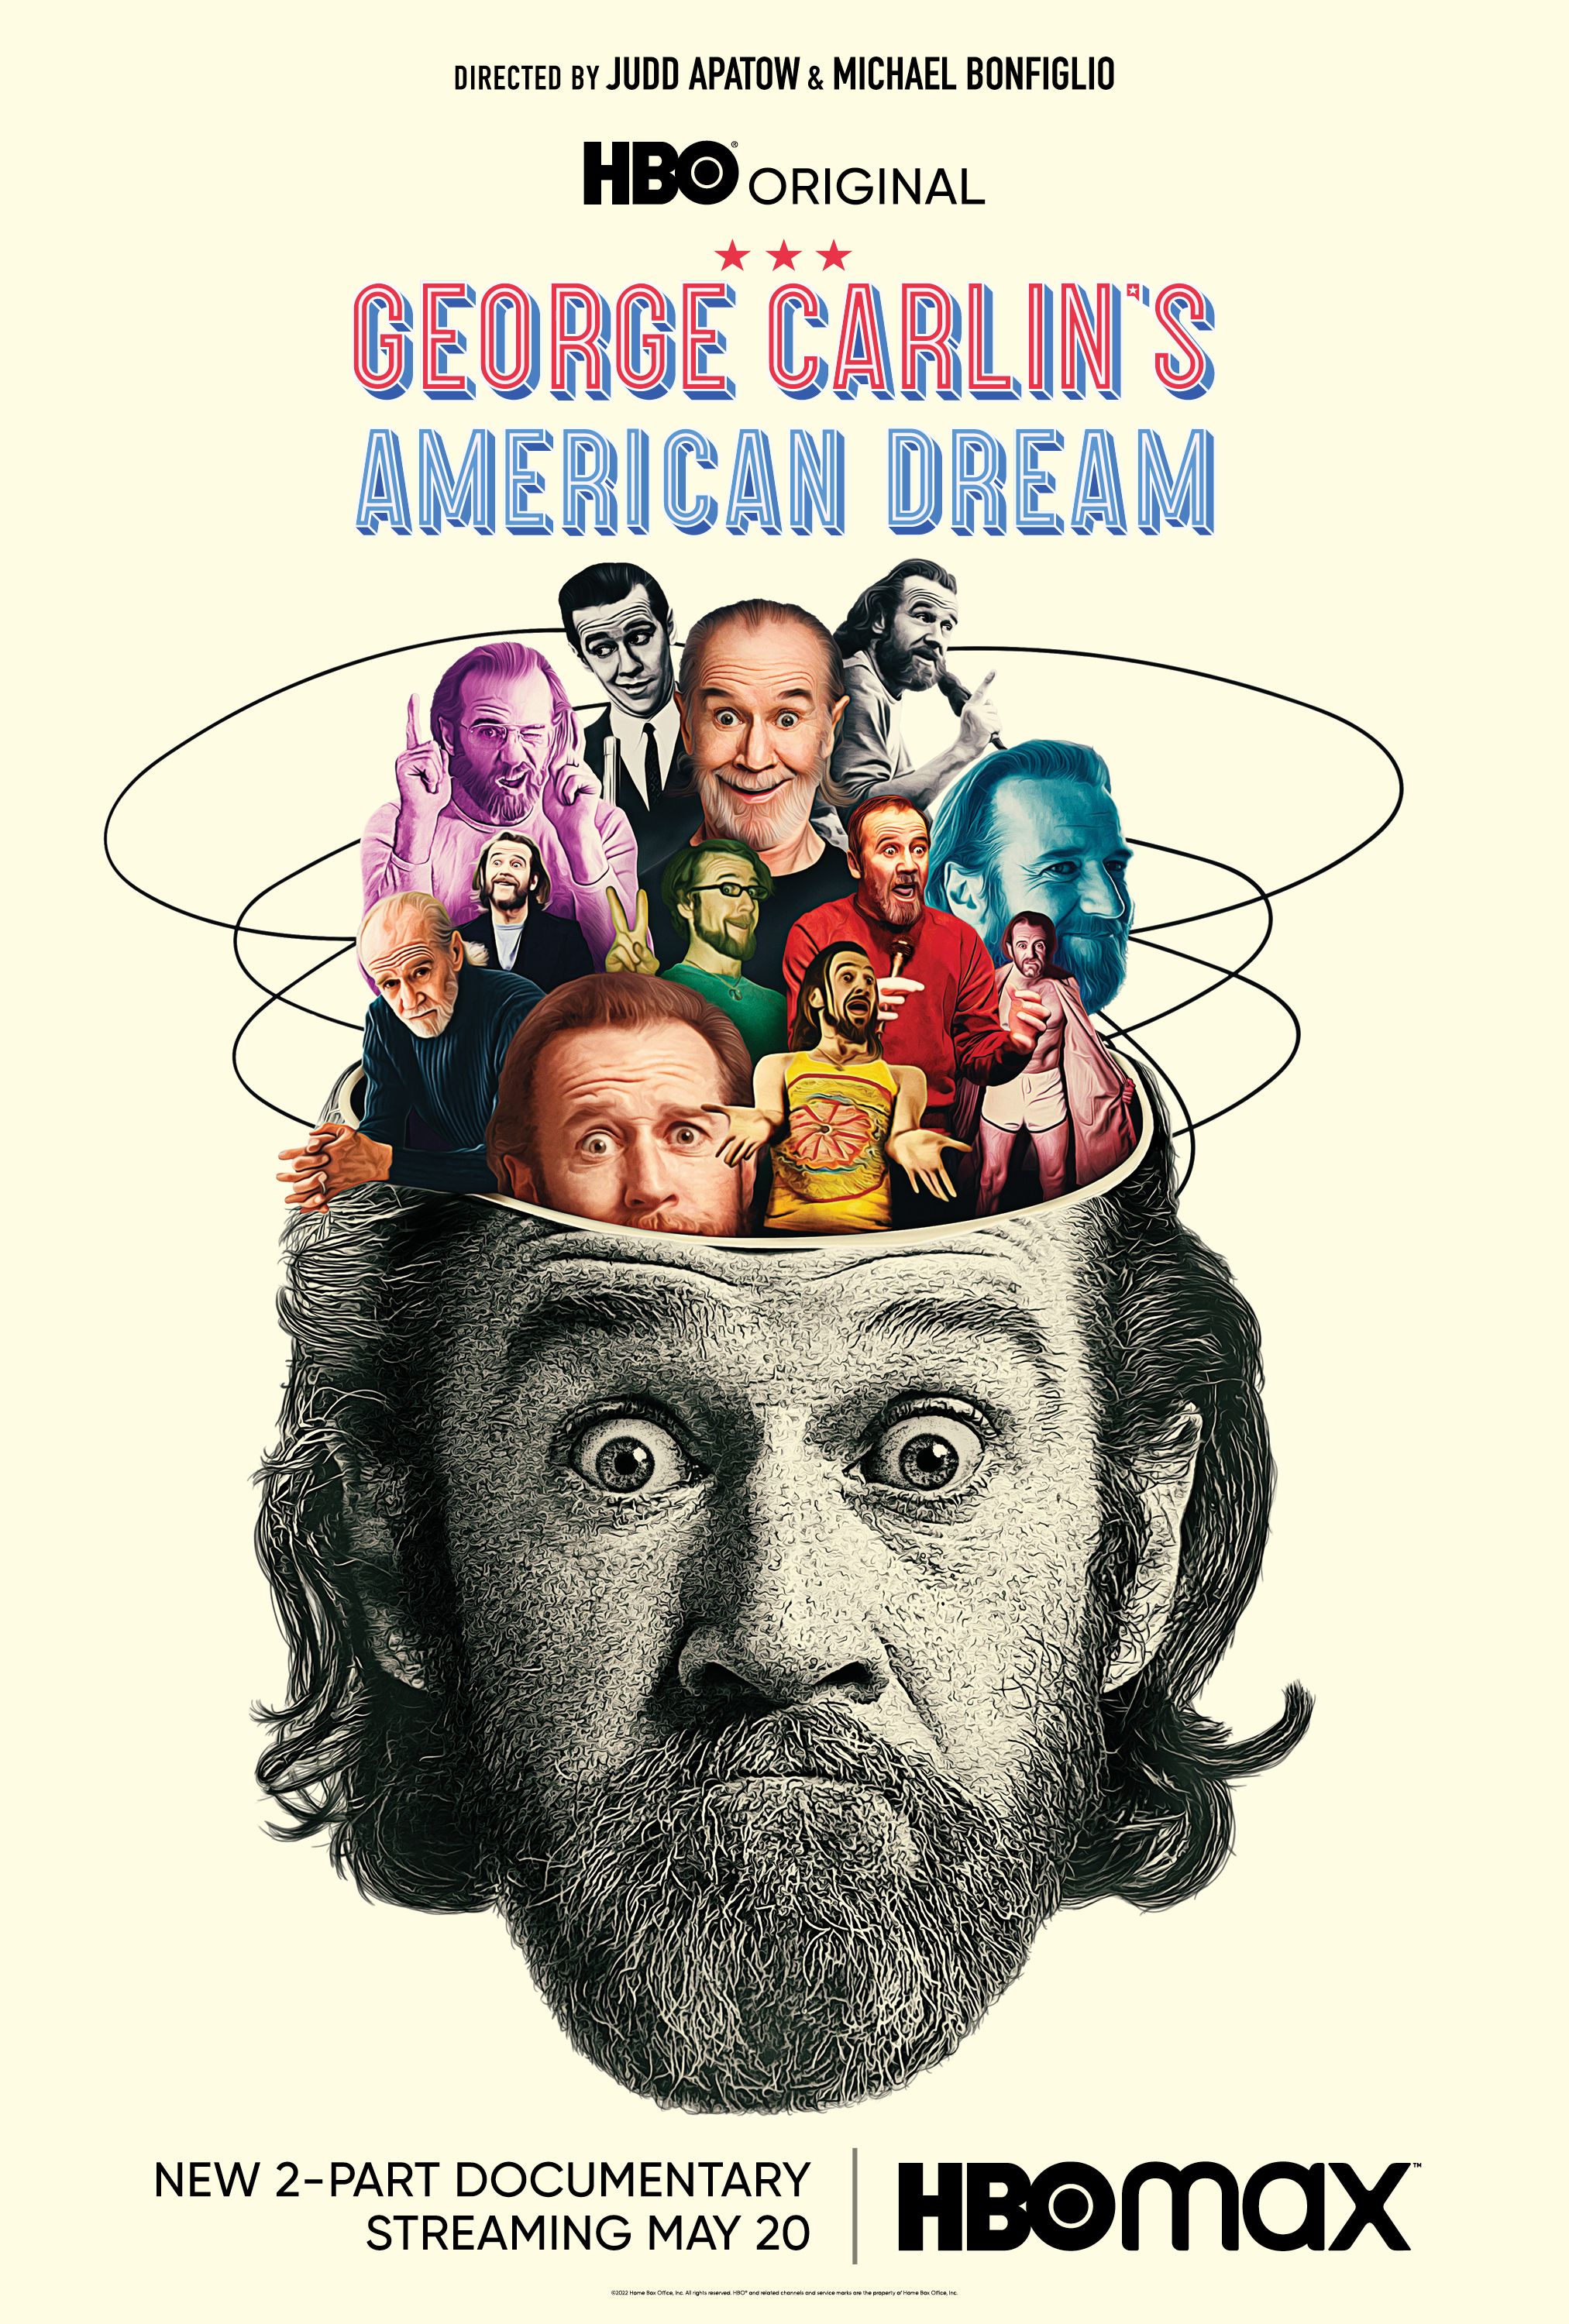 Carlin's American Dream Trailer Dives Into Judd Apatow Documentary